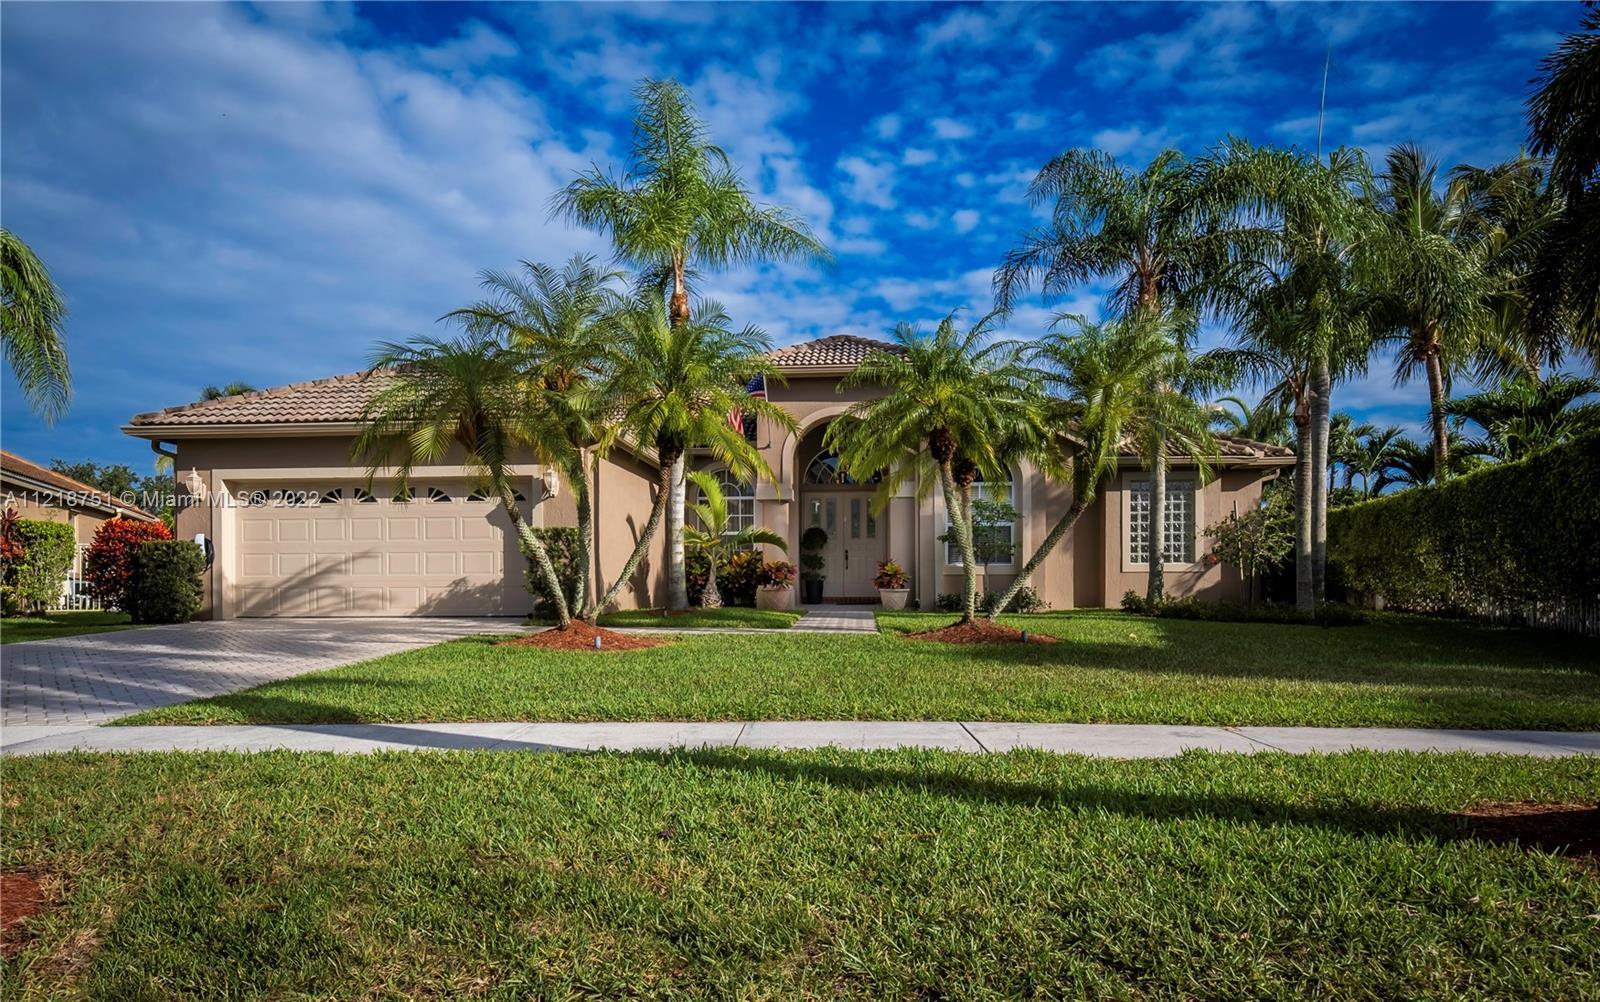 JUST LISTED! BEAUTIFUL HOME AT BOCA FALLS!!! 4BED, 3 BATHS, new appliances, 2 car garage, 24hs TWO m